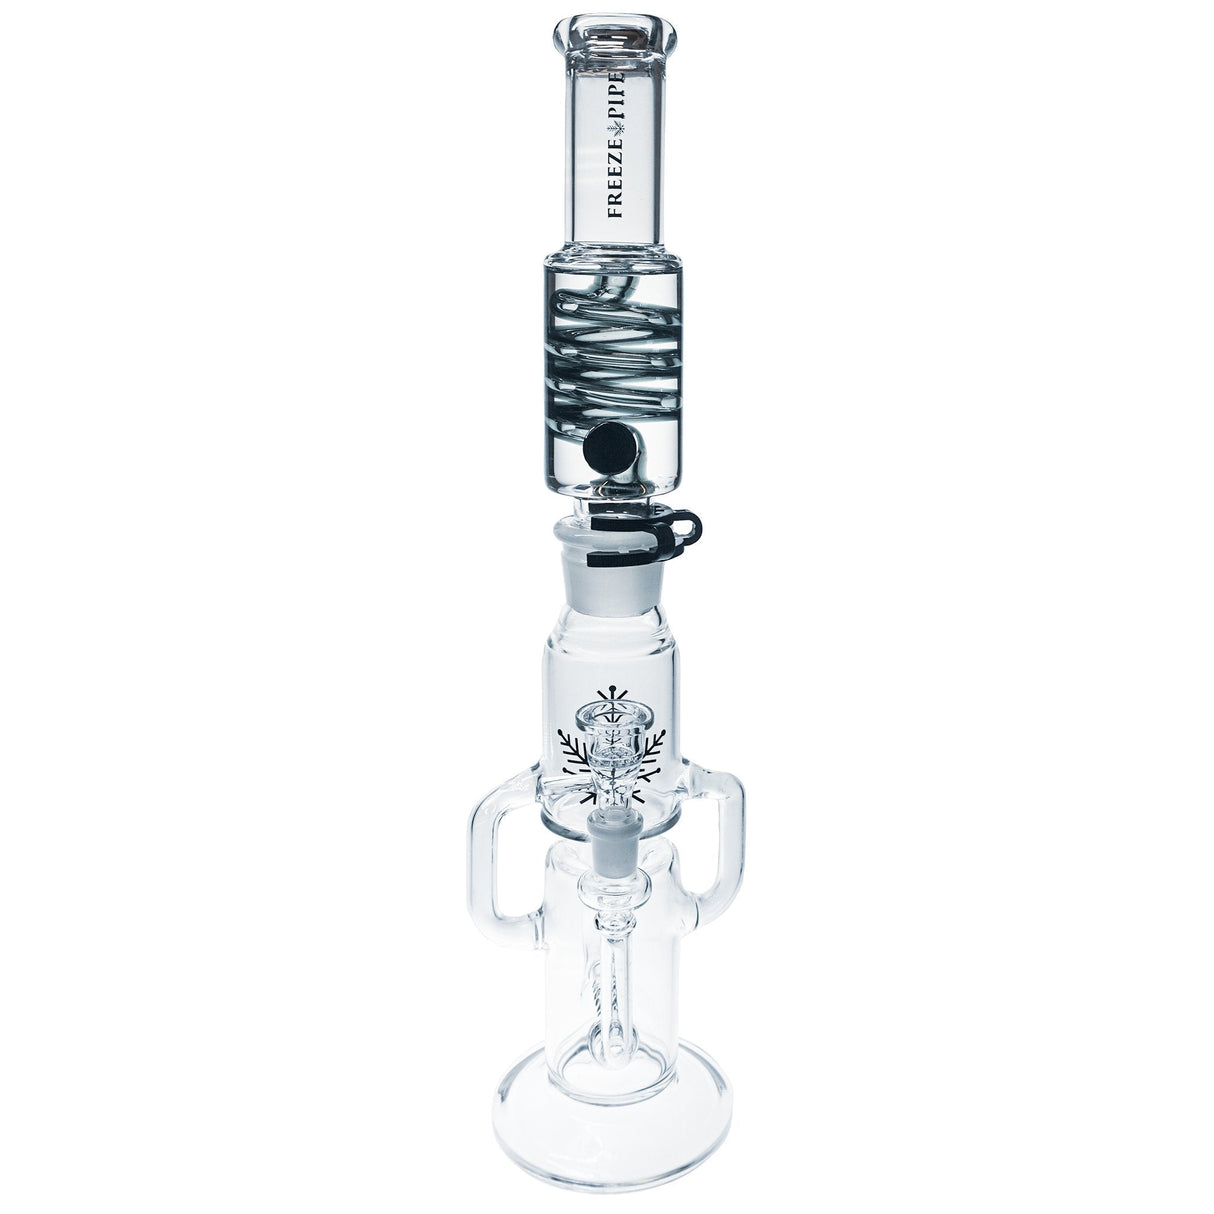 Freeze Pipe Recycler Dab Rig with 14mm Joint, Clear Glass Design, Front View on White Background